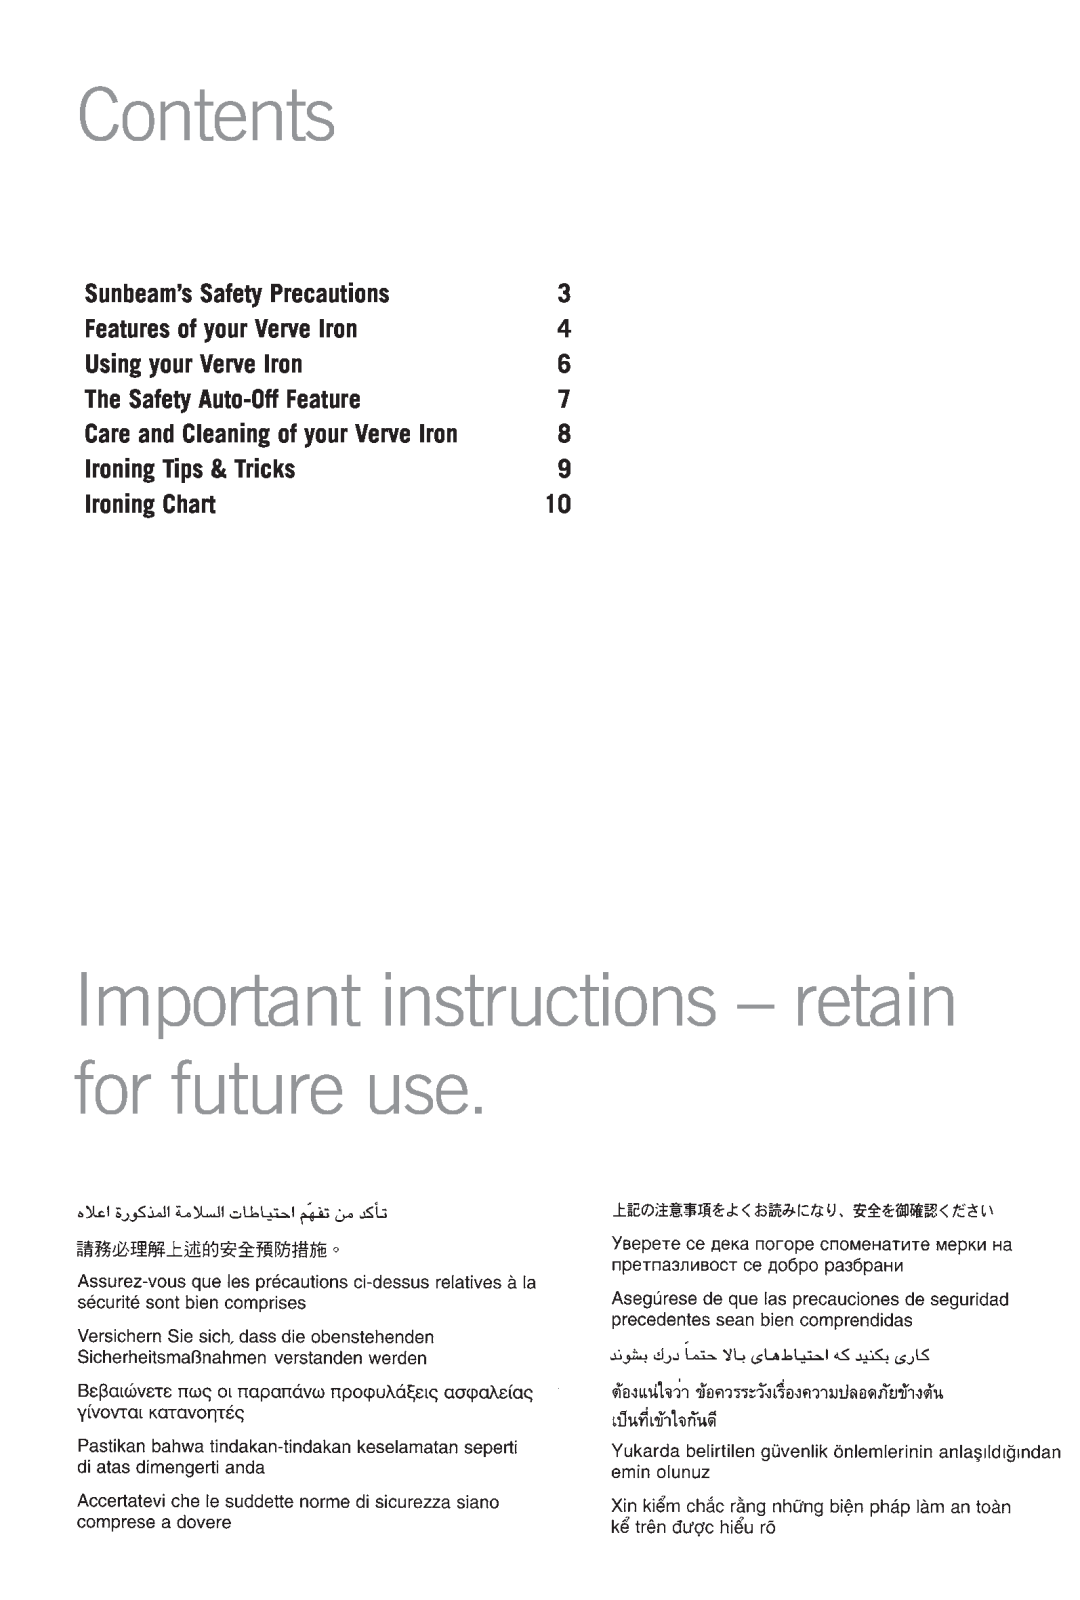 Sunbeam SR6565 manual Contents, Important instructions - retain for future use, Sunbeam’s Safety Precautions, Ironing Chart 